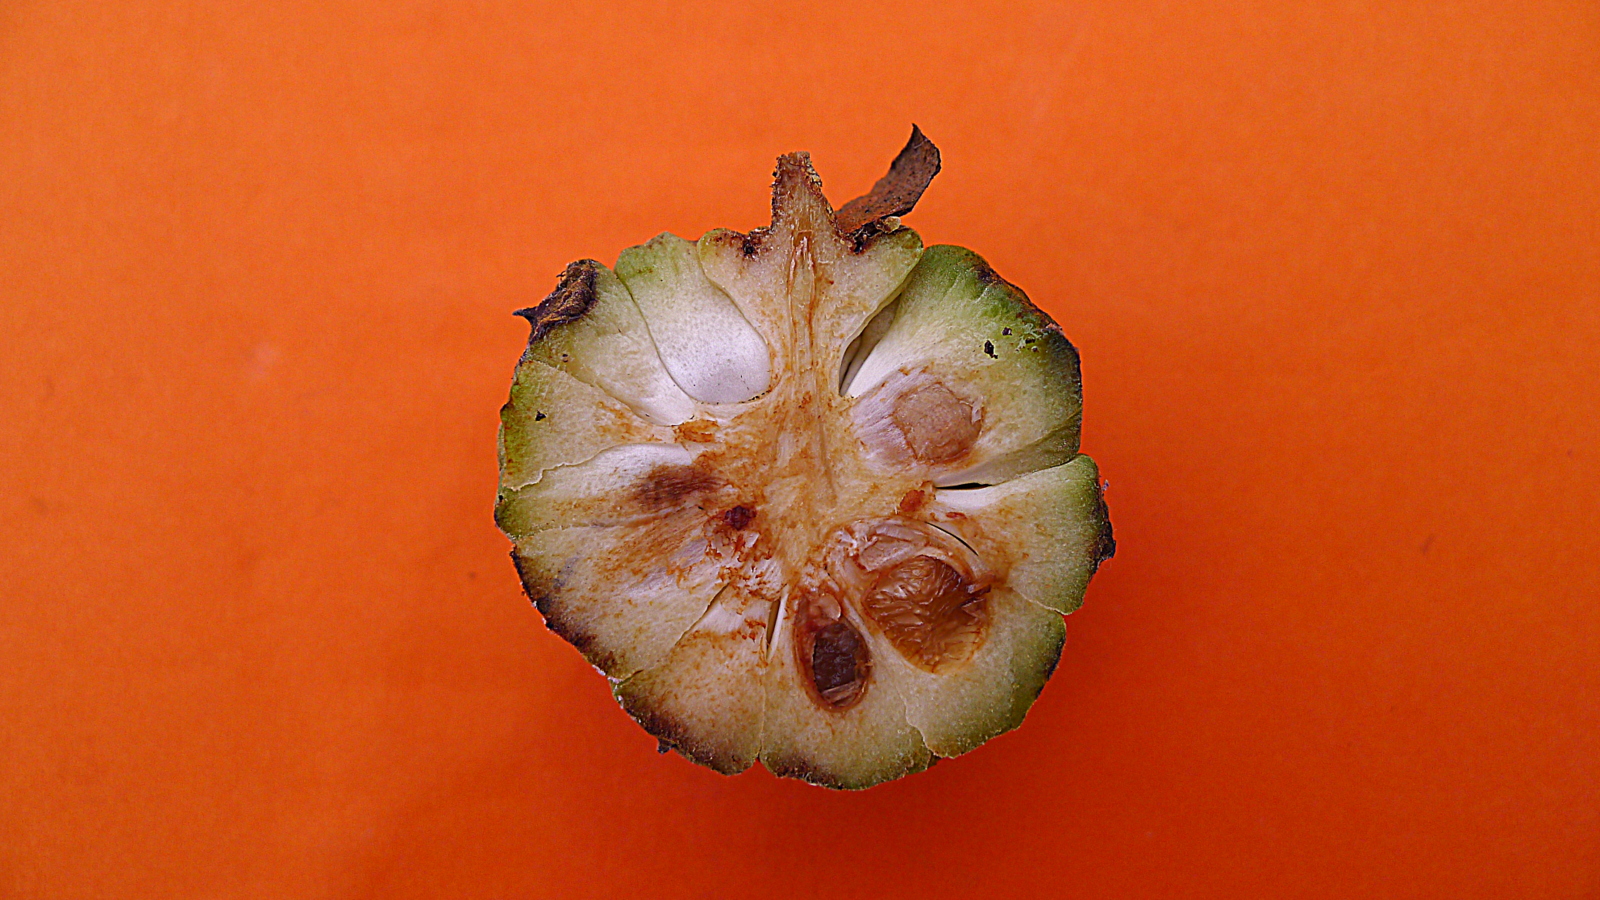 the fruit is split open and ready to be eaten